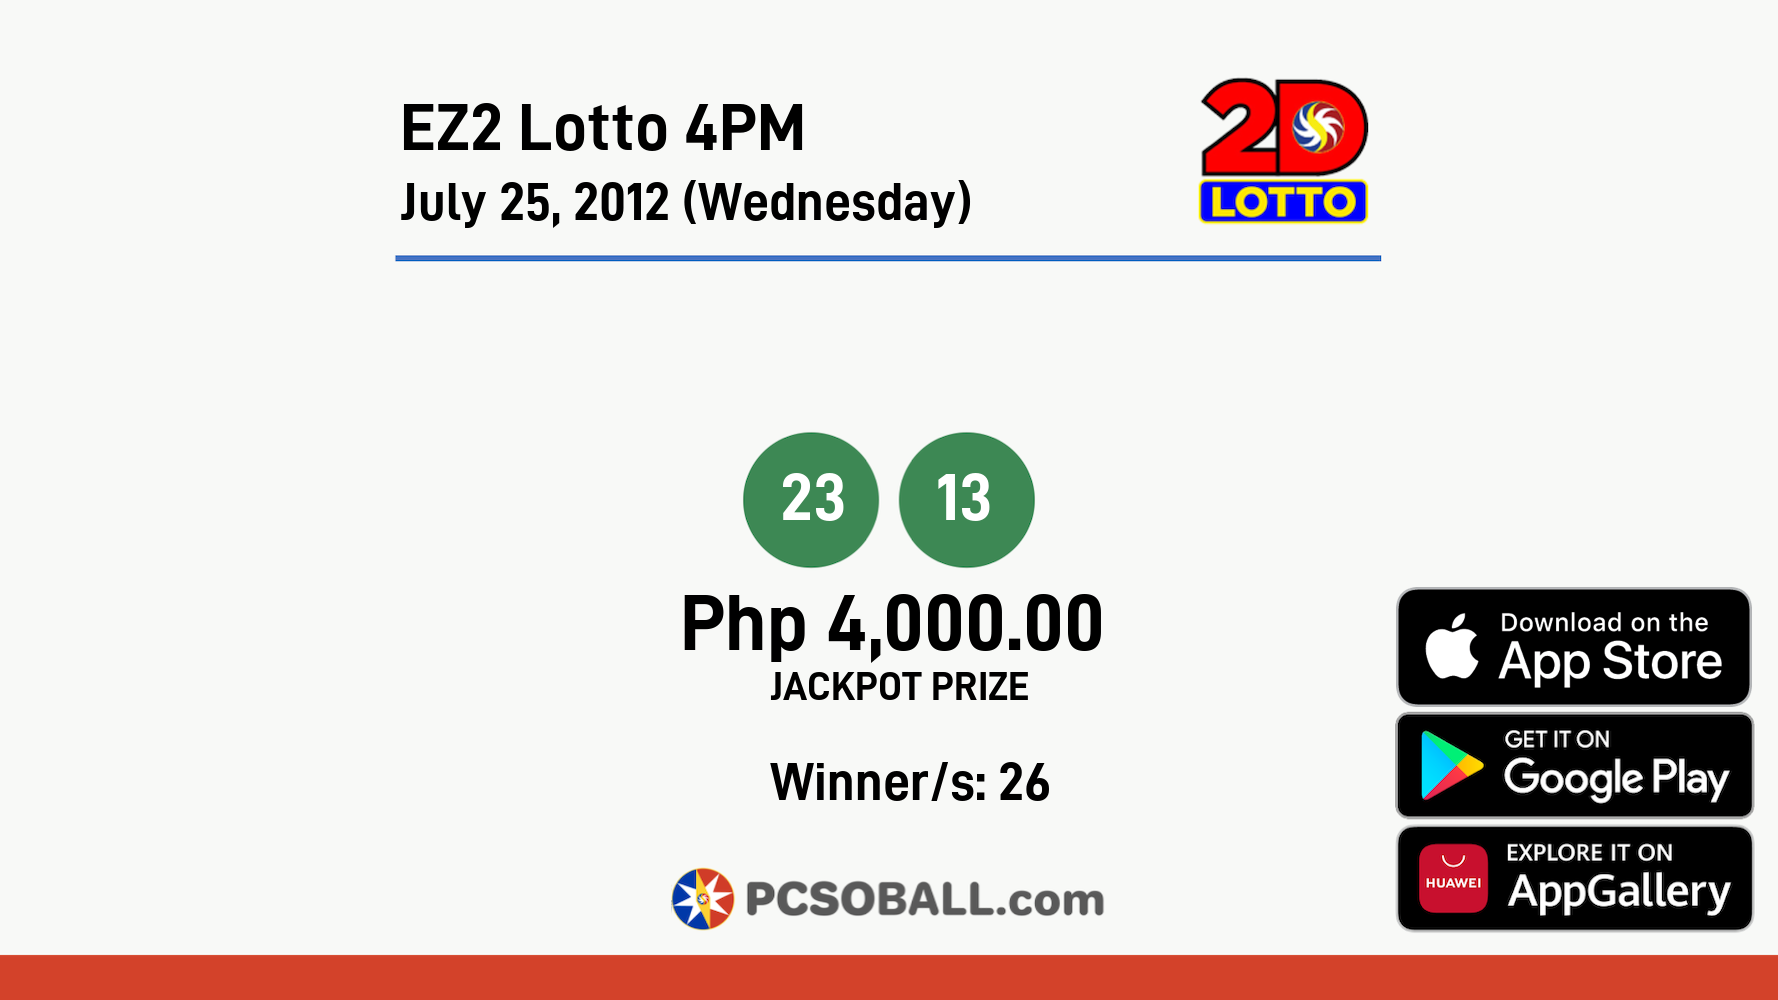 EZ2 Lotto 4PM July 25, 2012 (Wednesday) Result